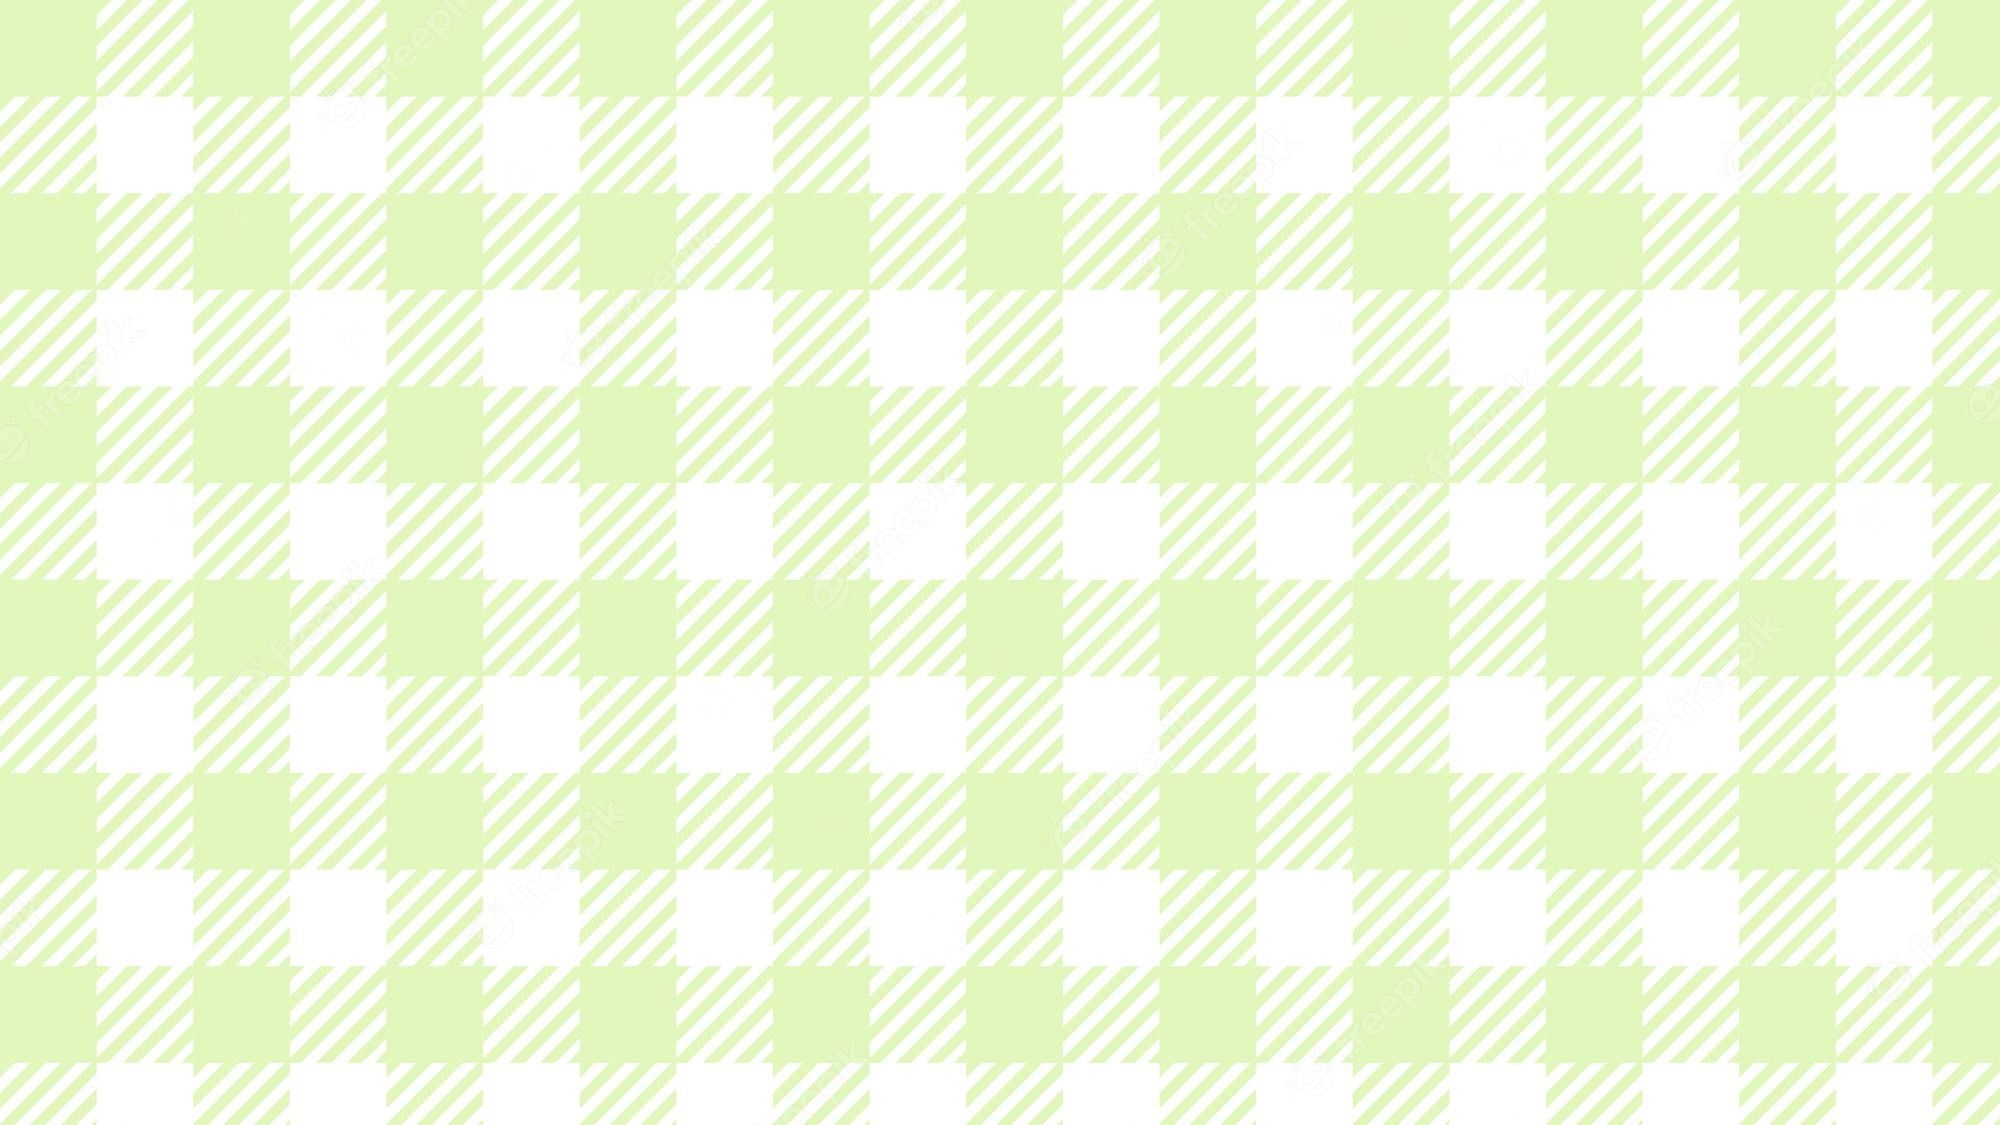 A green and white plaid pattern - Soft green